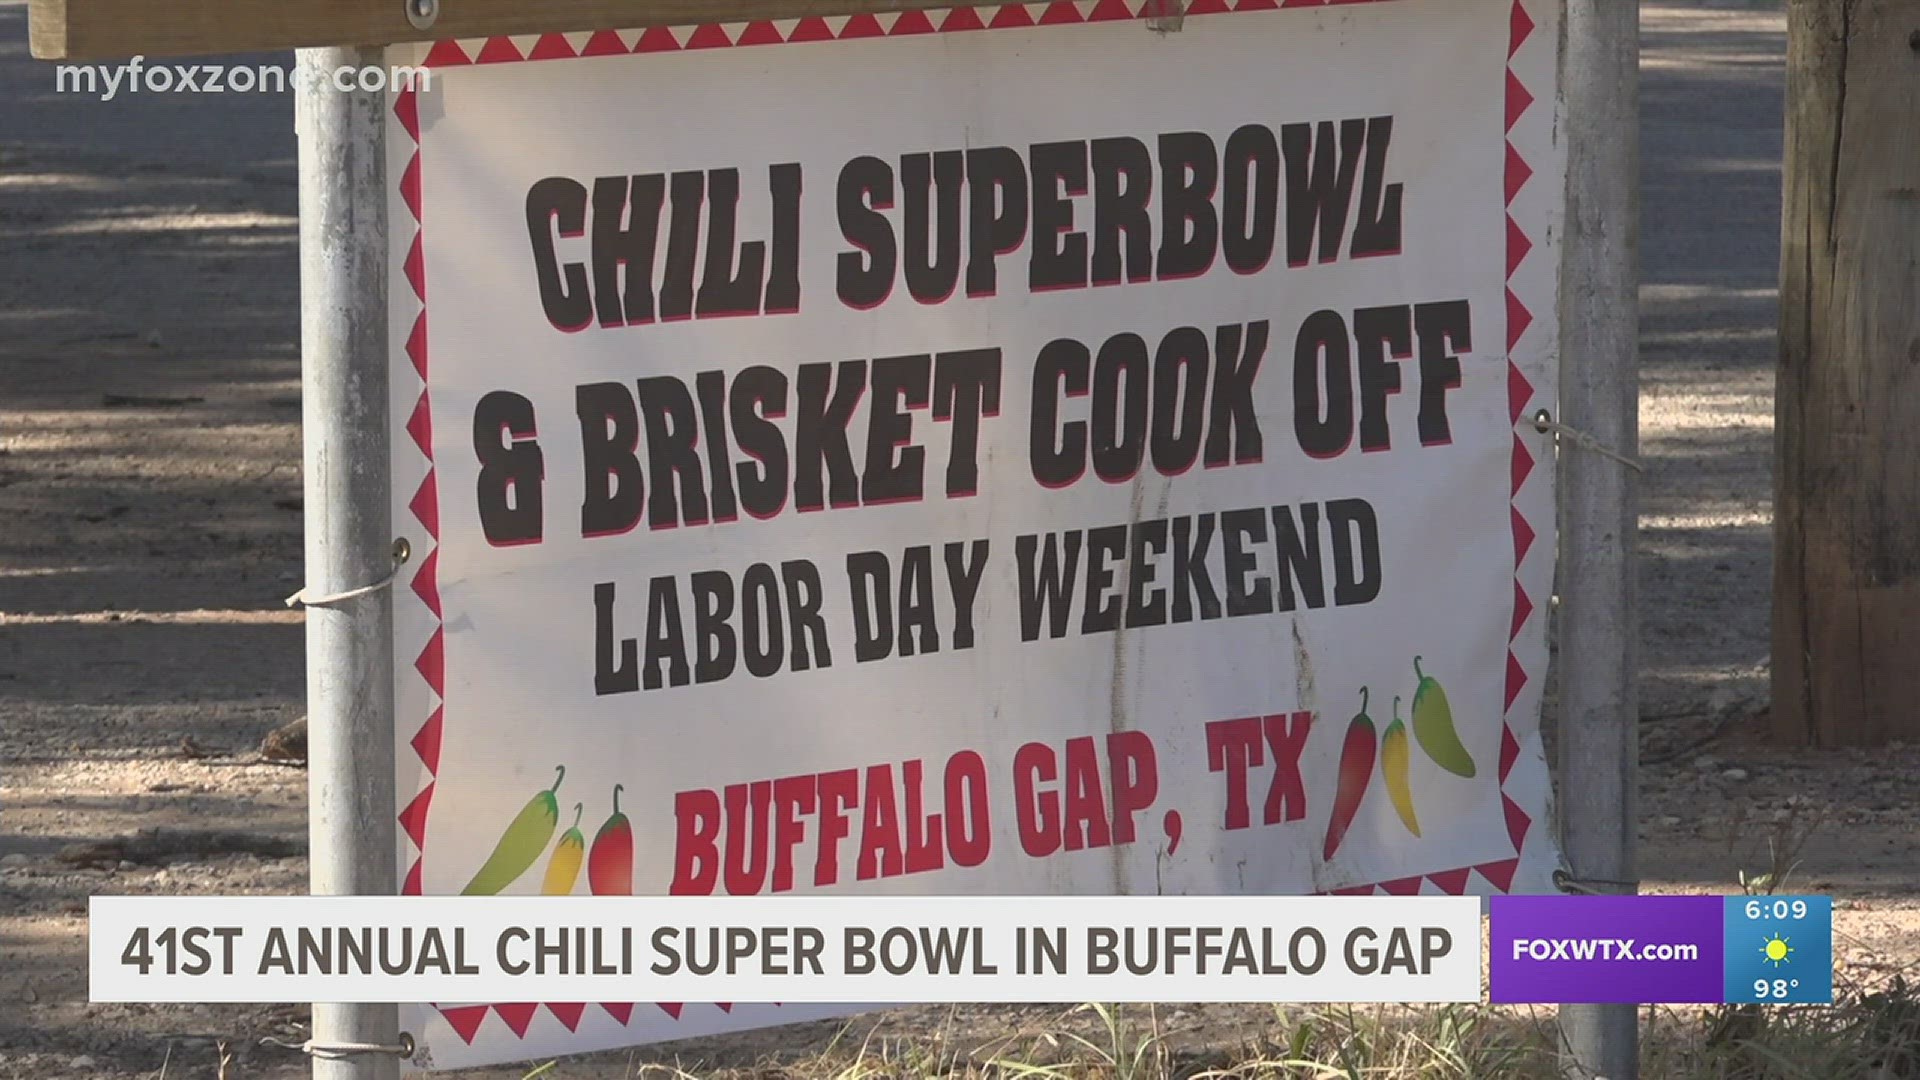 On Saturday, September 2nd, at 9 a.m., the 41st annual Chili Super Bowl & Brisket Cook-Off will start at the Old Settlers Grounds in Buffalo Gap, Texas.